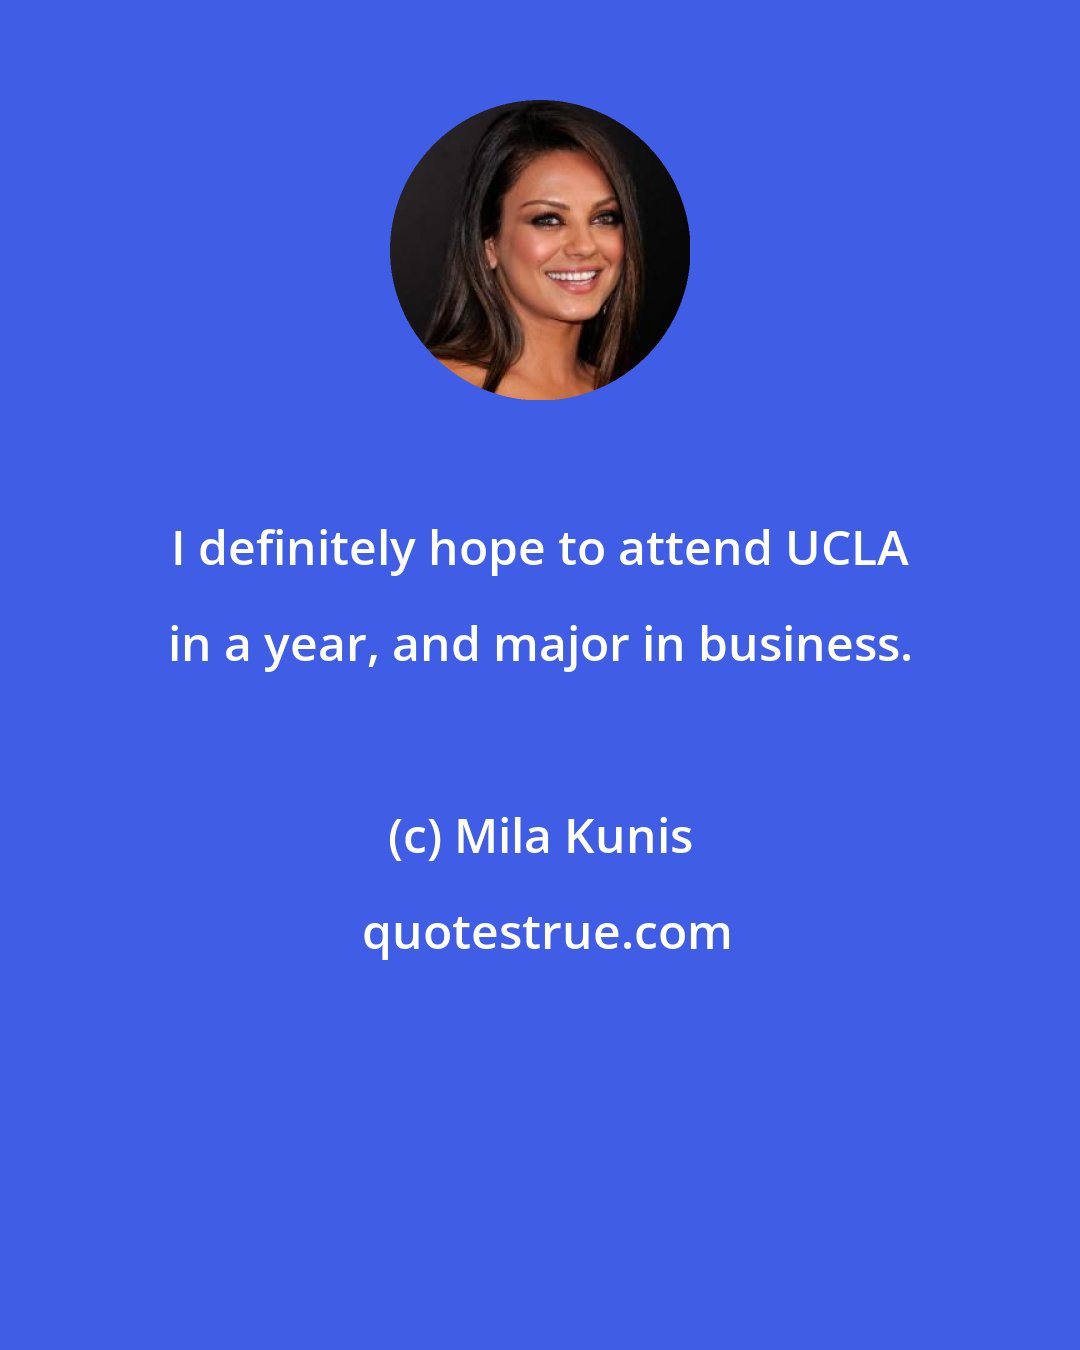 Mila Kunis: I definitely hope to attend UCLA in a year, and major in business.